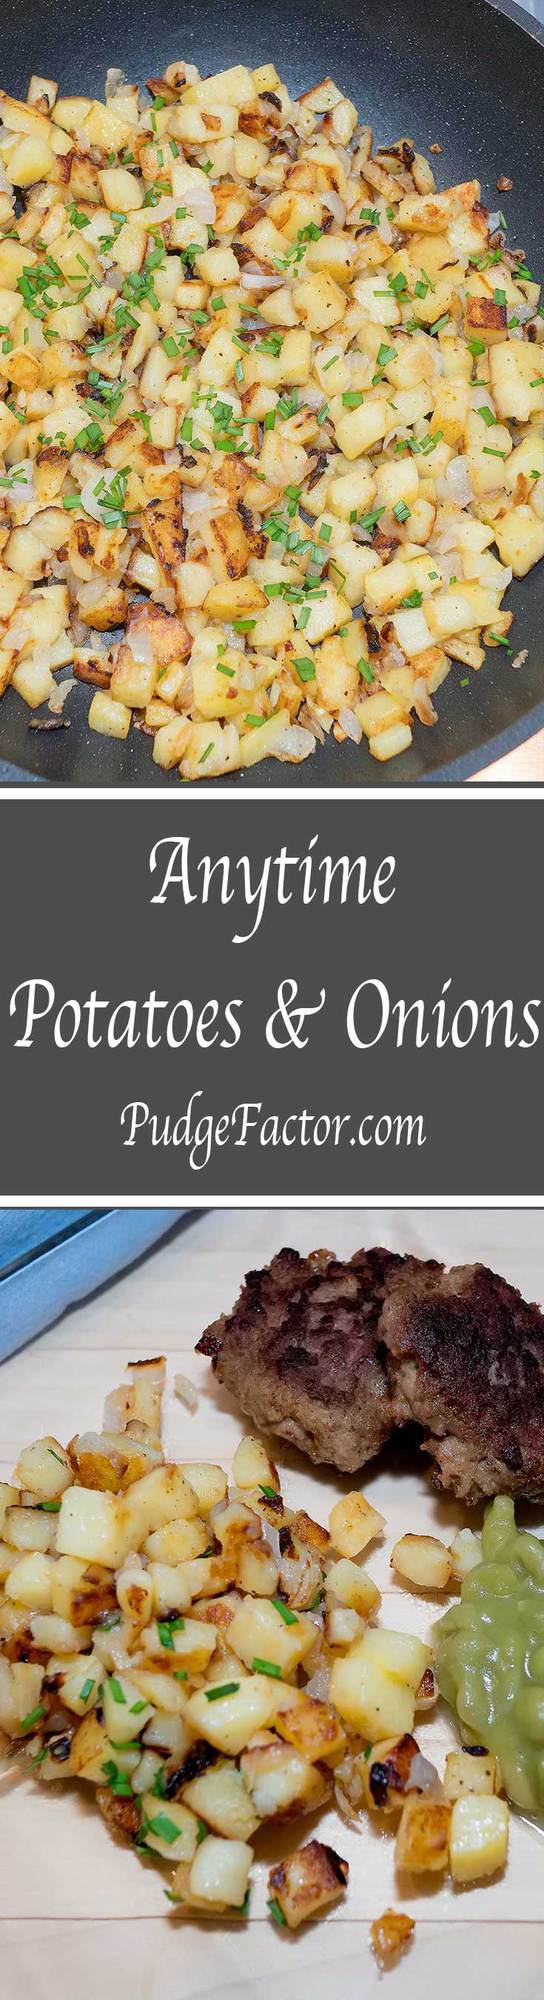 Anytime potatoes and onions